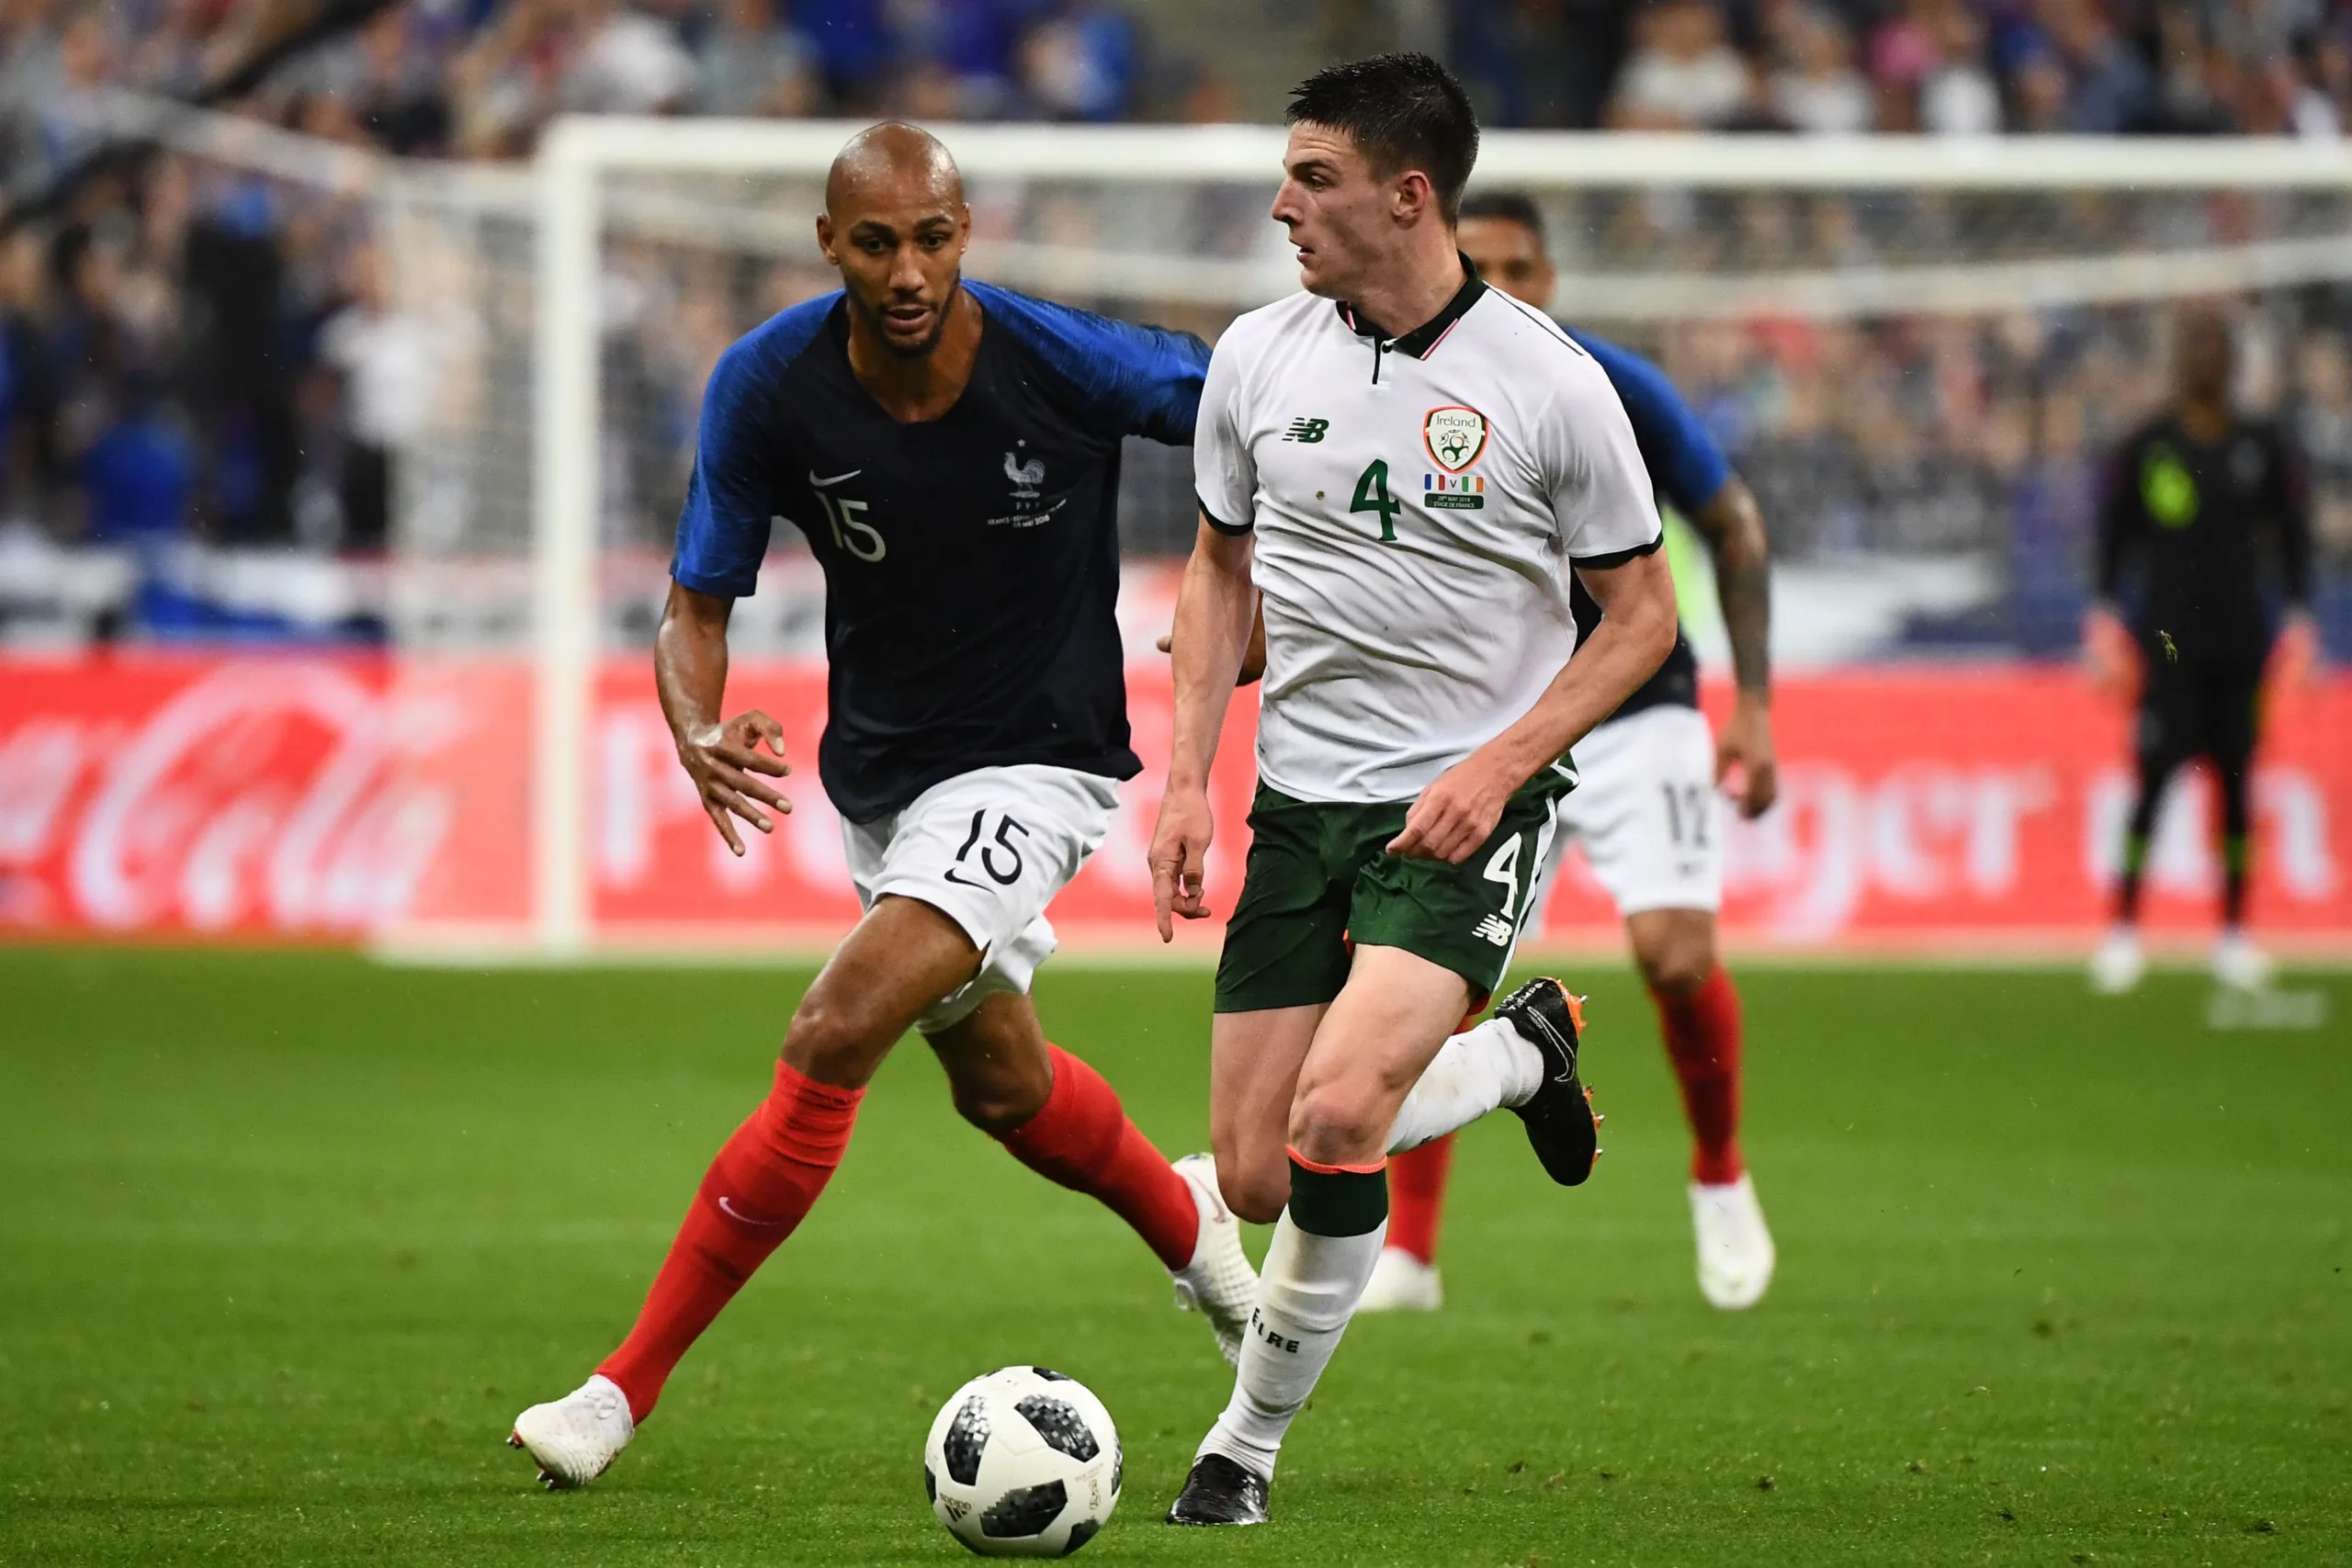 Declan Rice vs France, one of the Dual-Nationality Players on this list